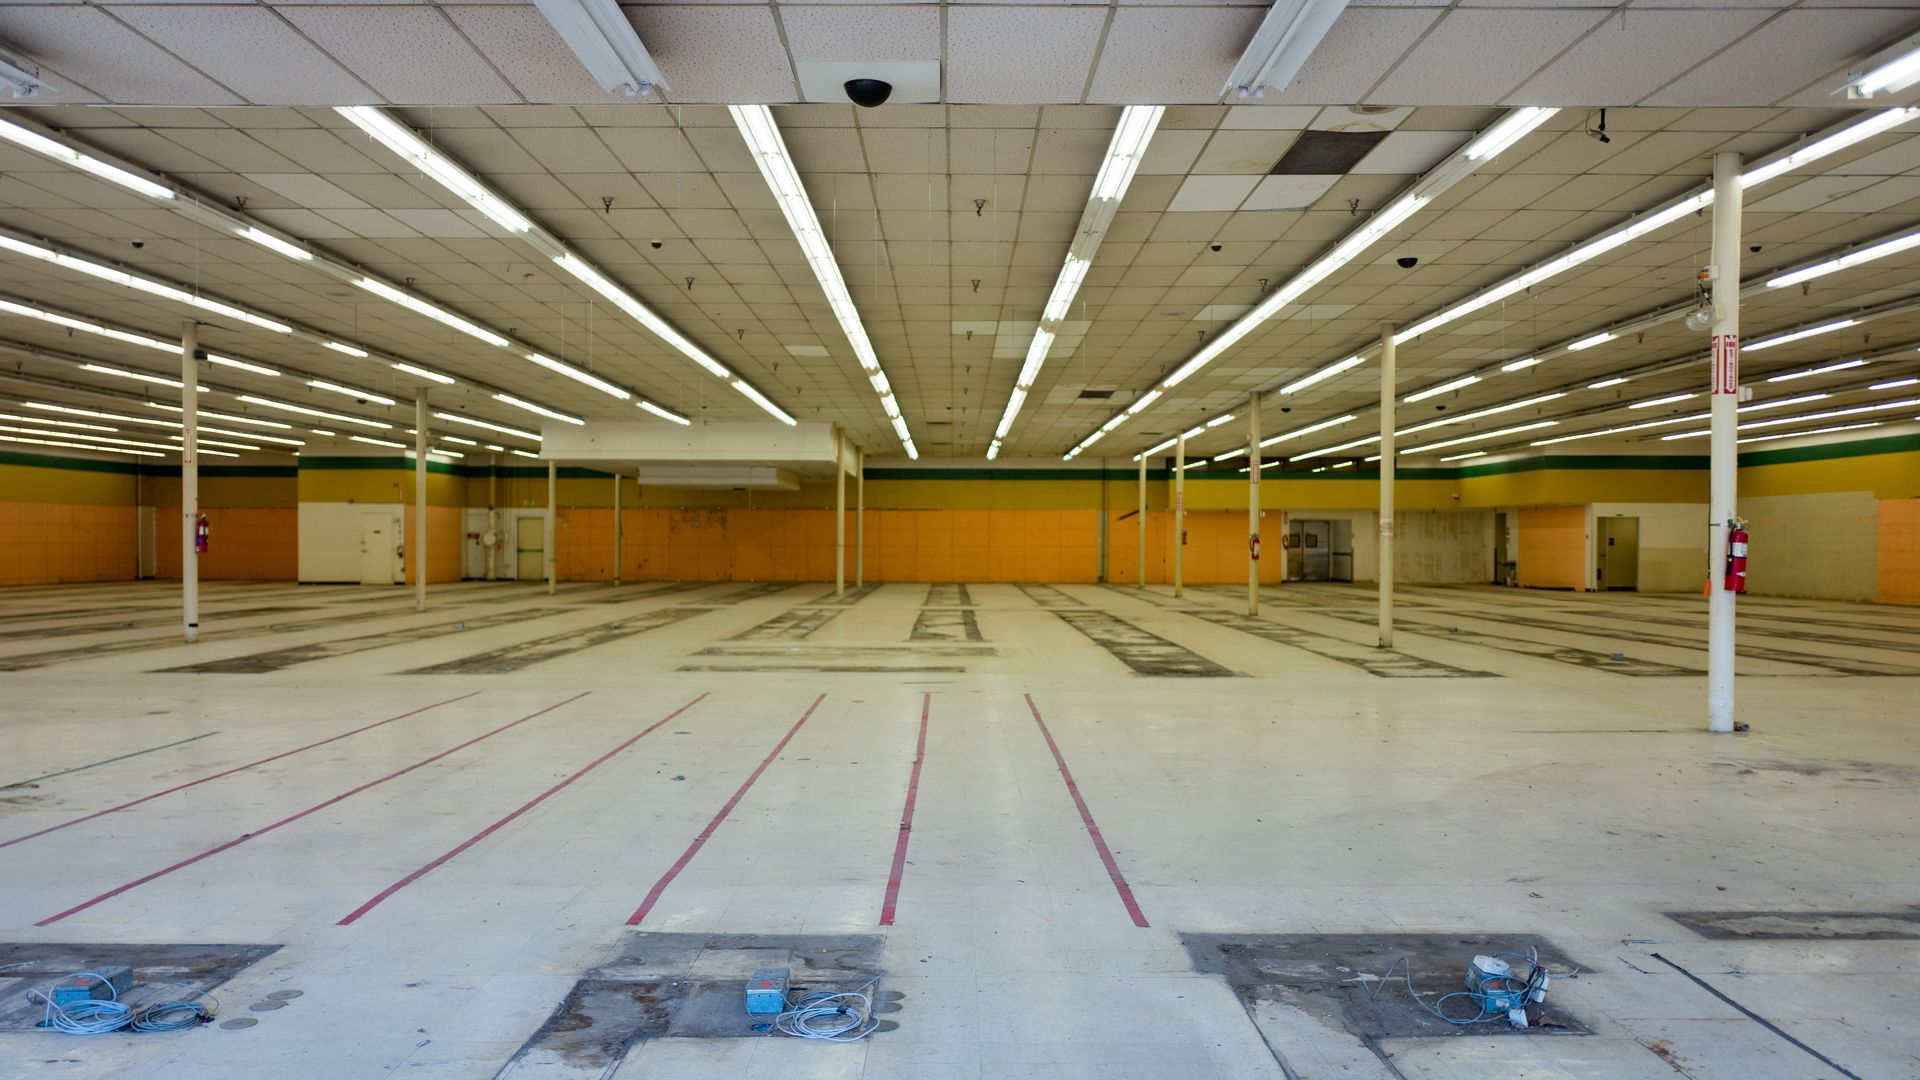 This image shows the inside of an empty and abandoned retail store with the fluorescent lights on.